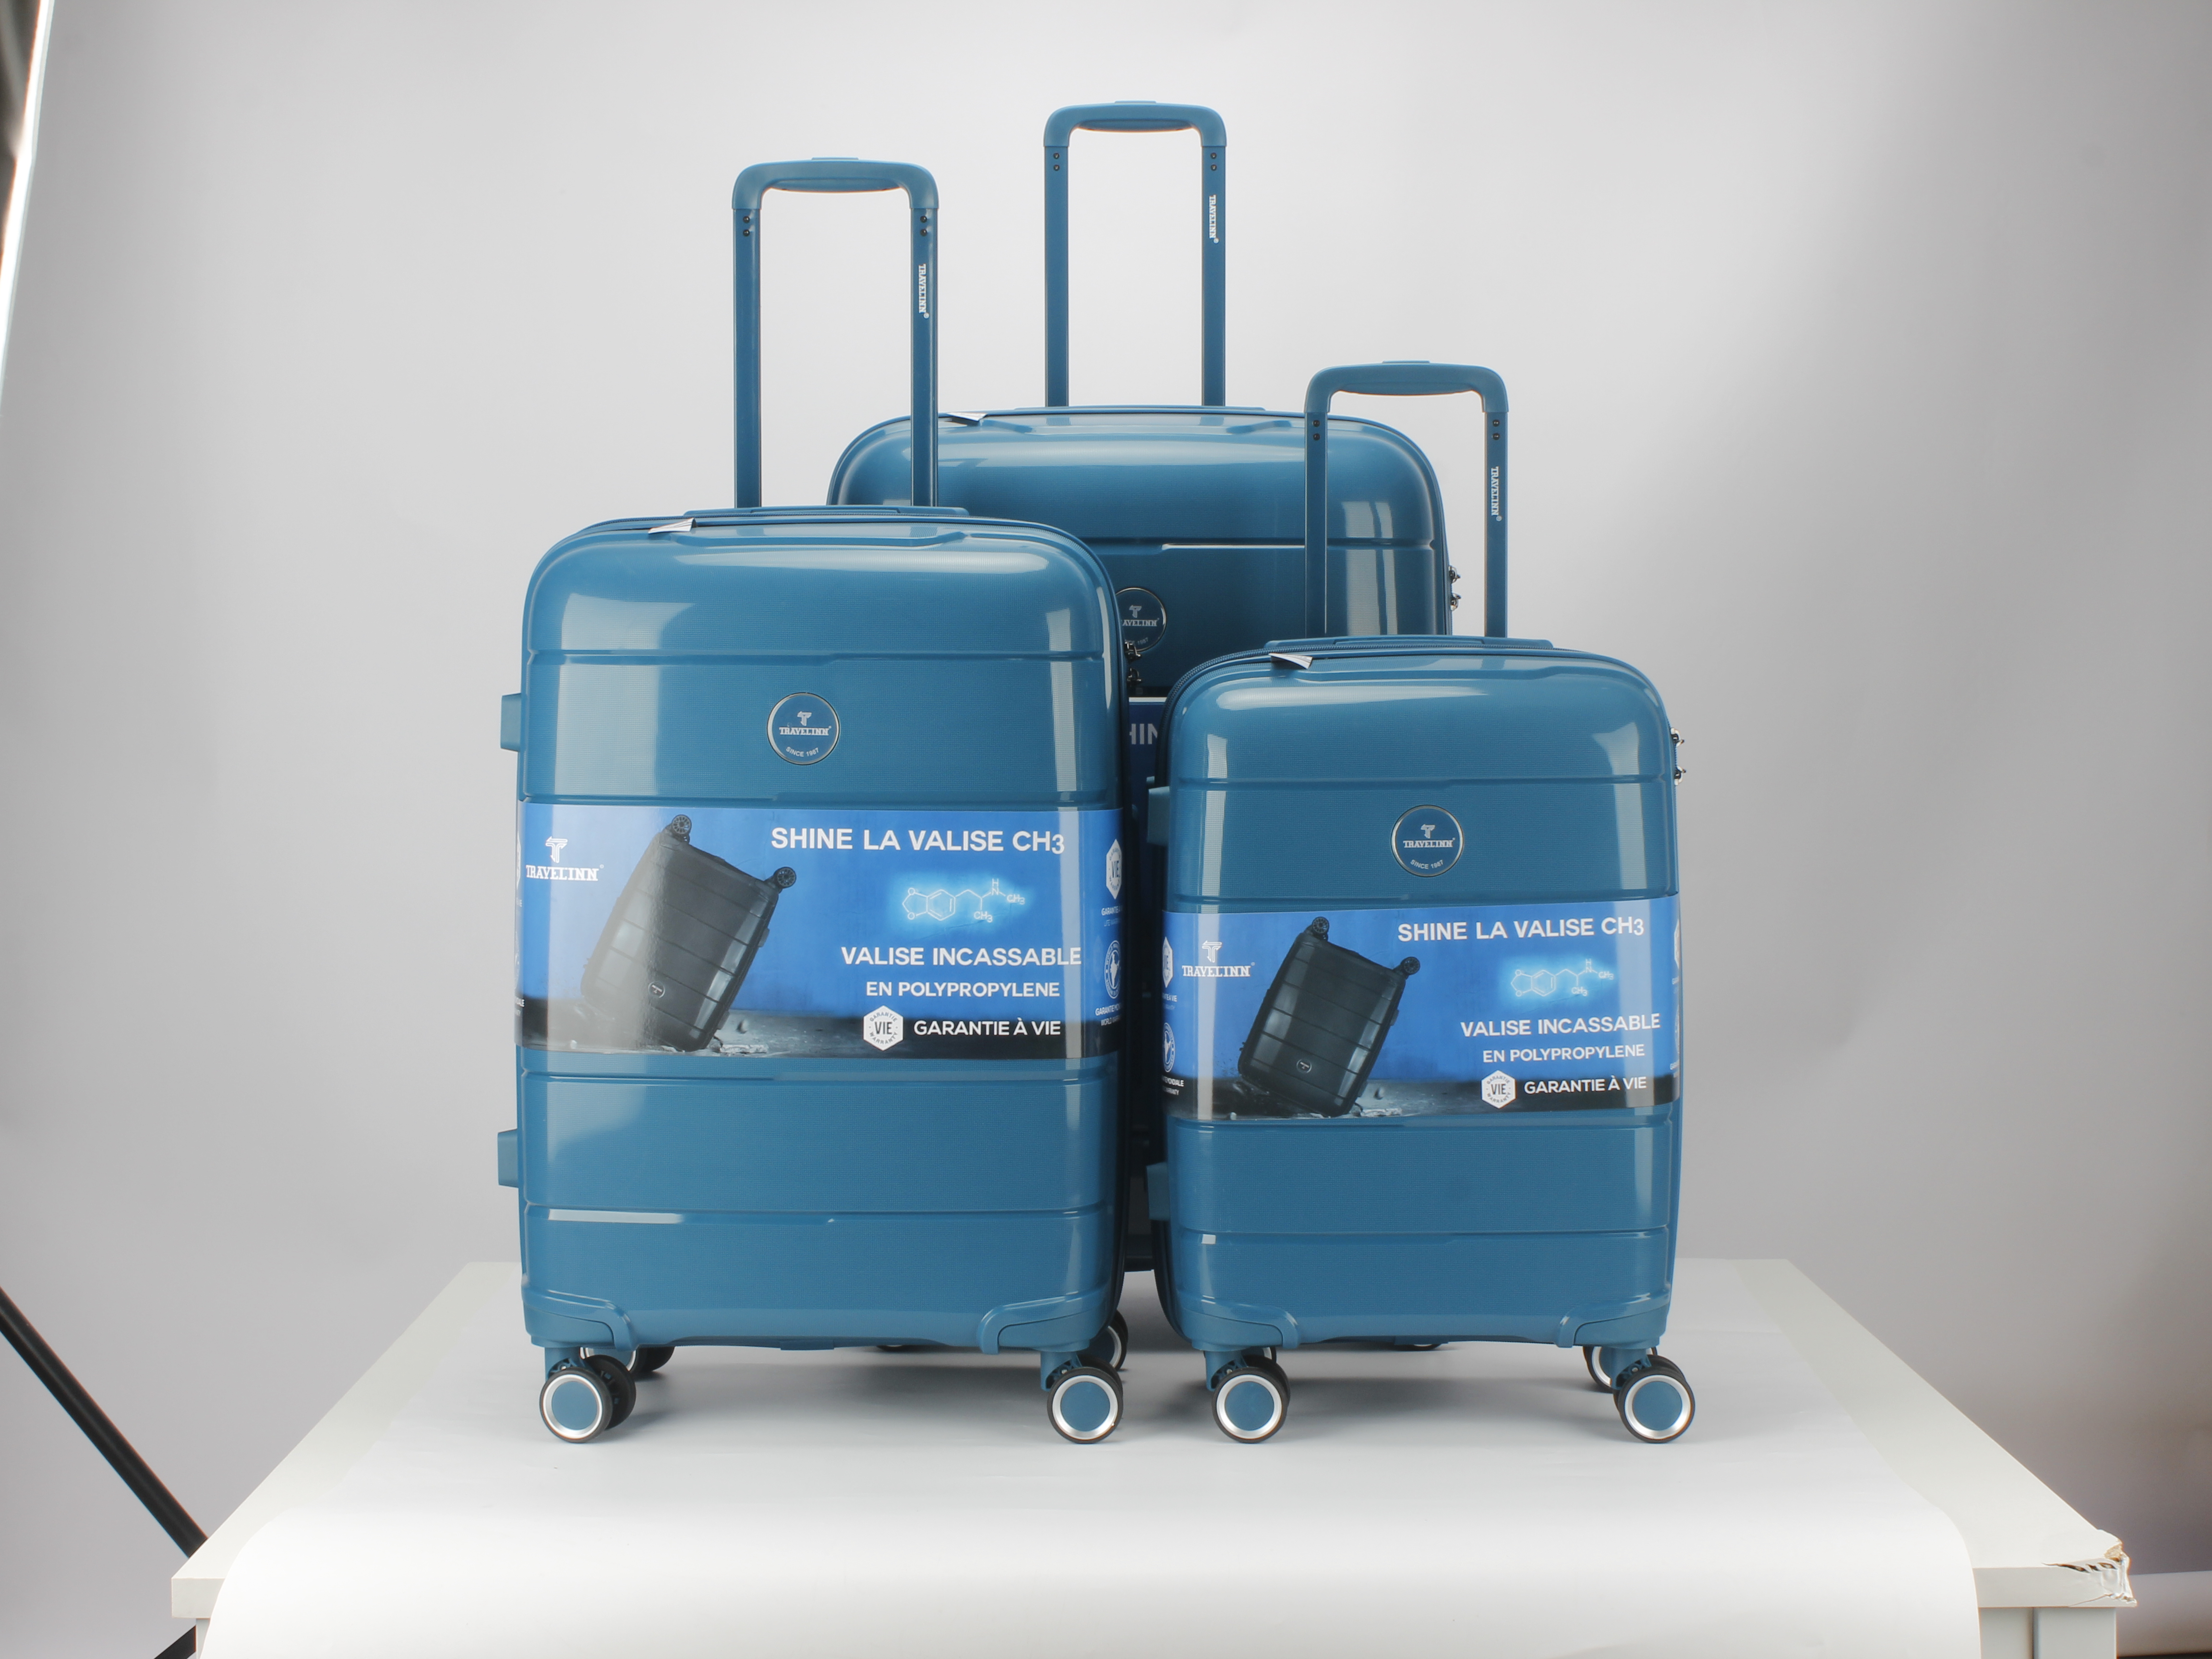 Convenient Luggage Moving Trolley for Easy Travel